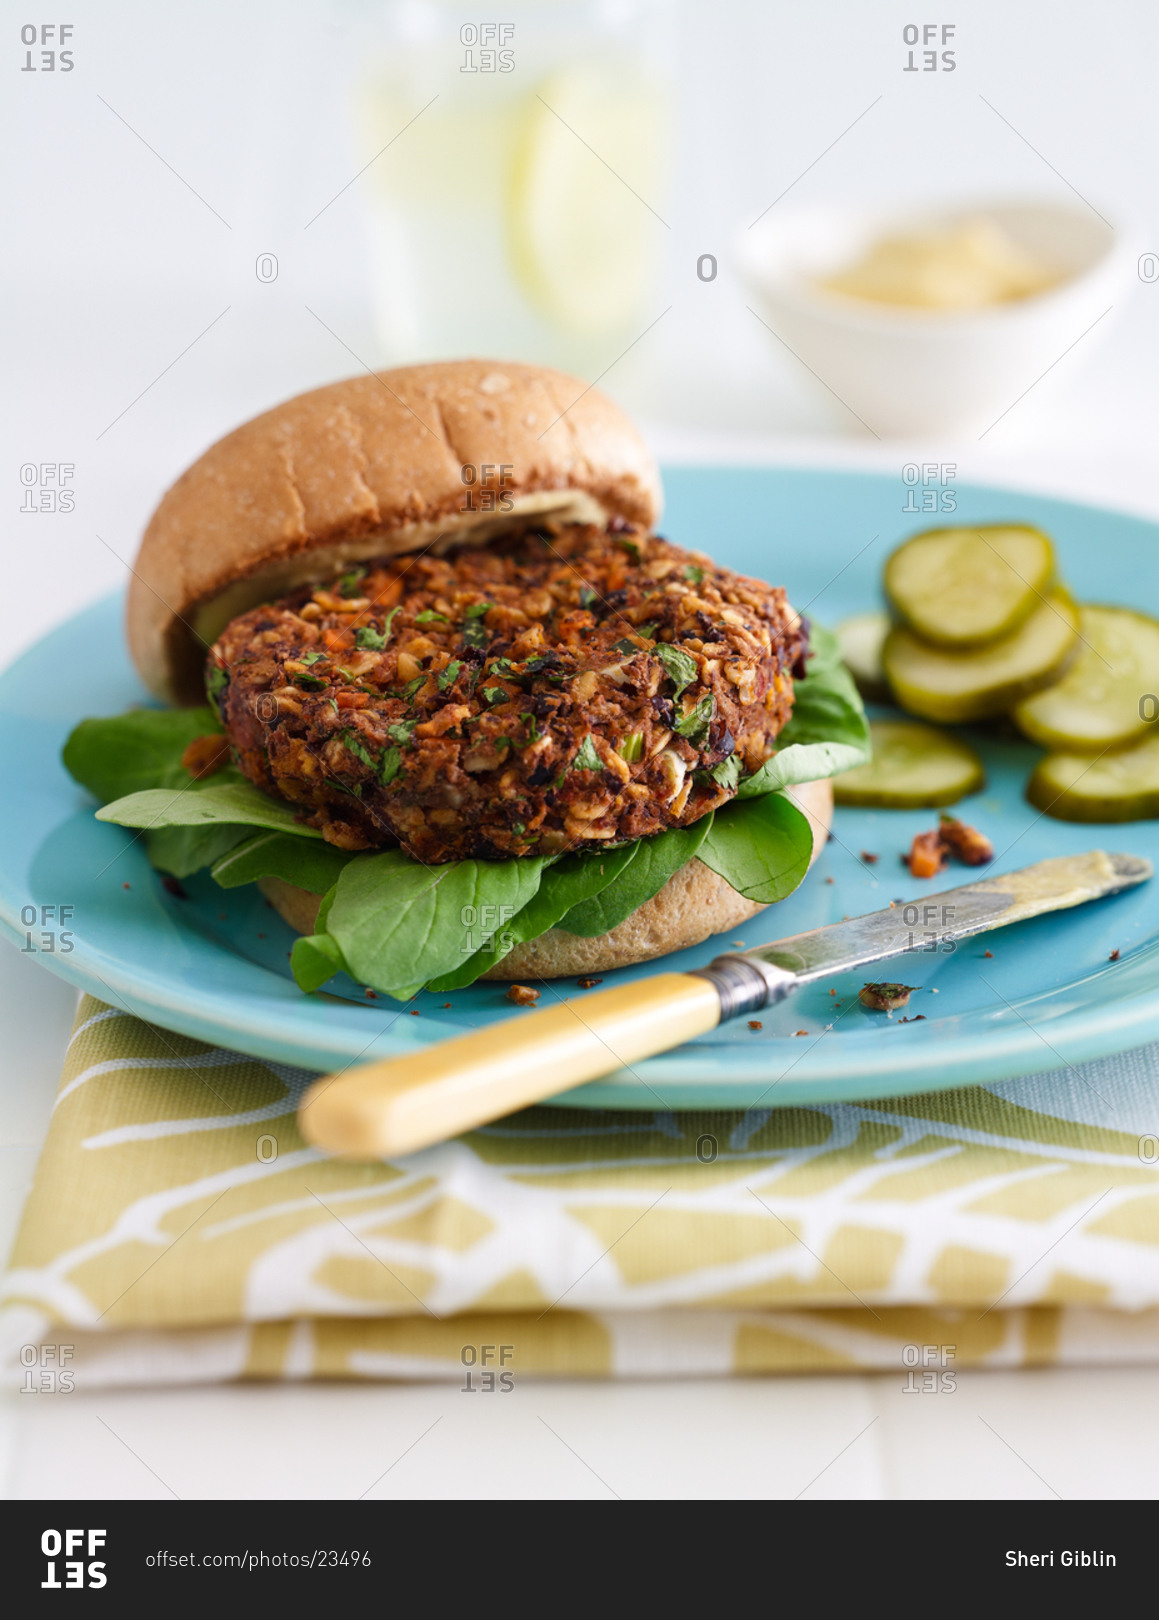 Black-bean Oatmeal Burger Served on Blue Plate with Pickles